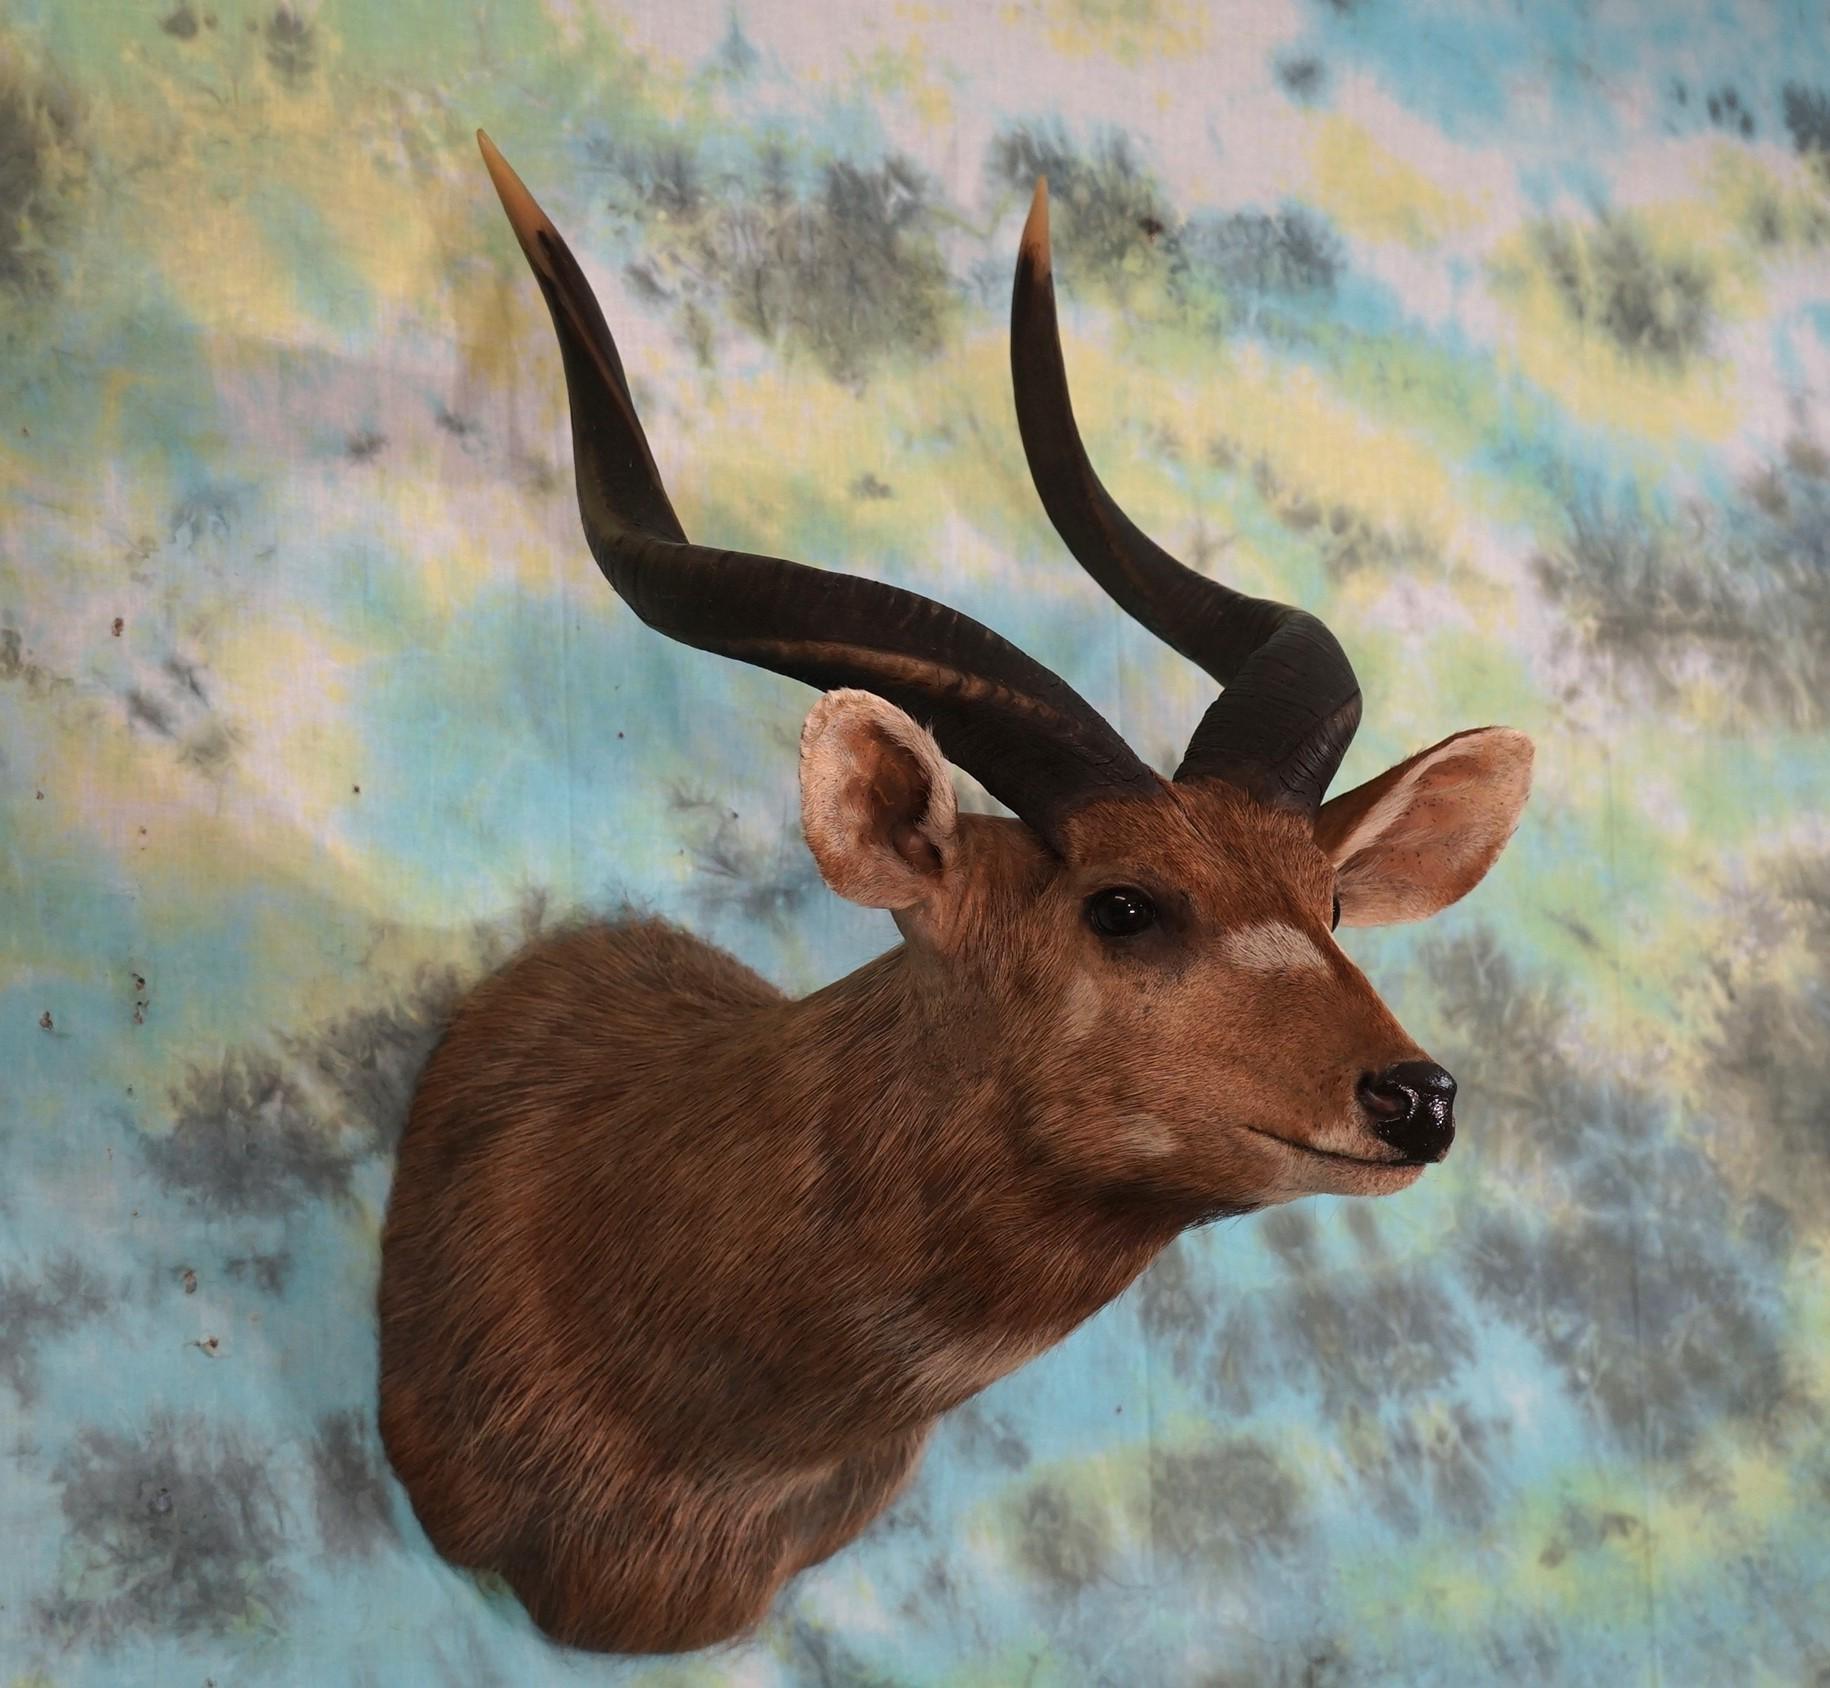 Record Class East African Sitatunga Swamp Antelope Shoulder Taxidermy Mount